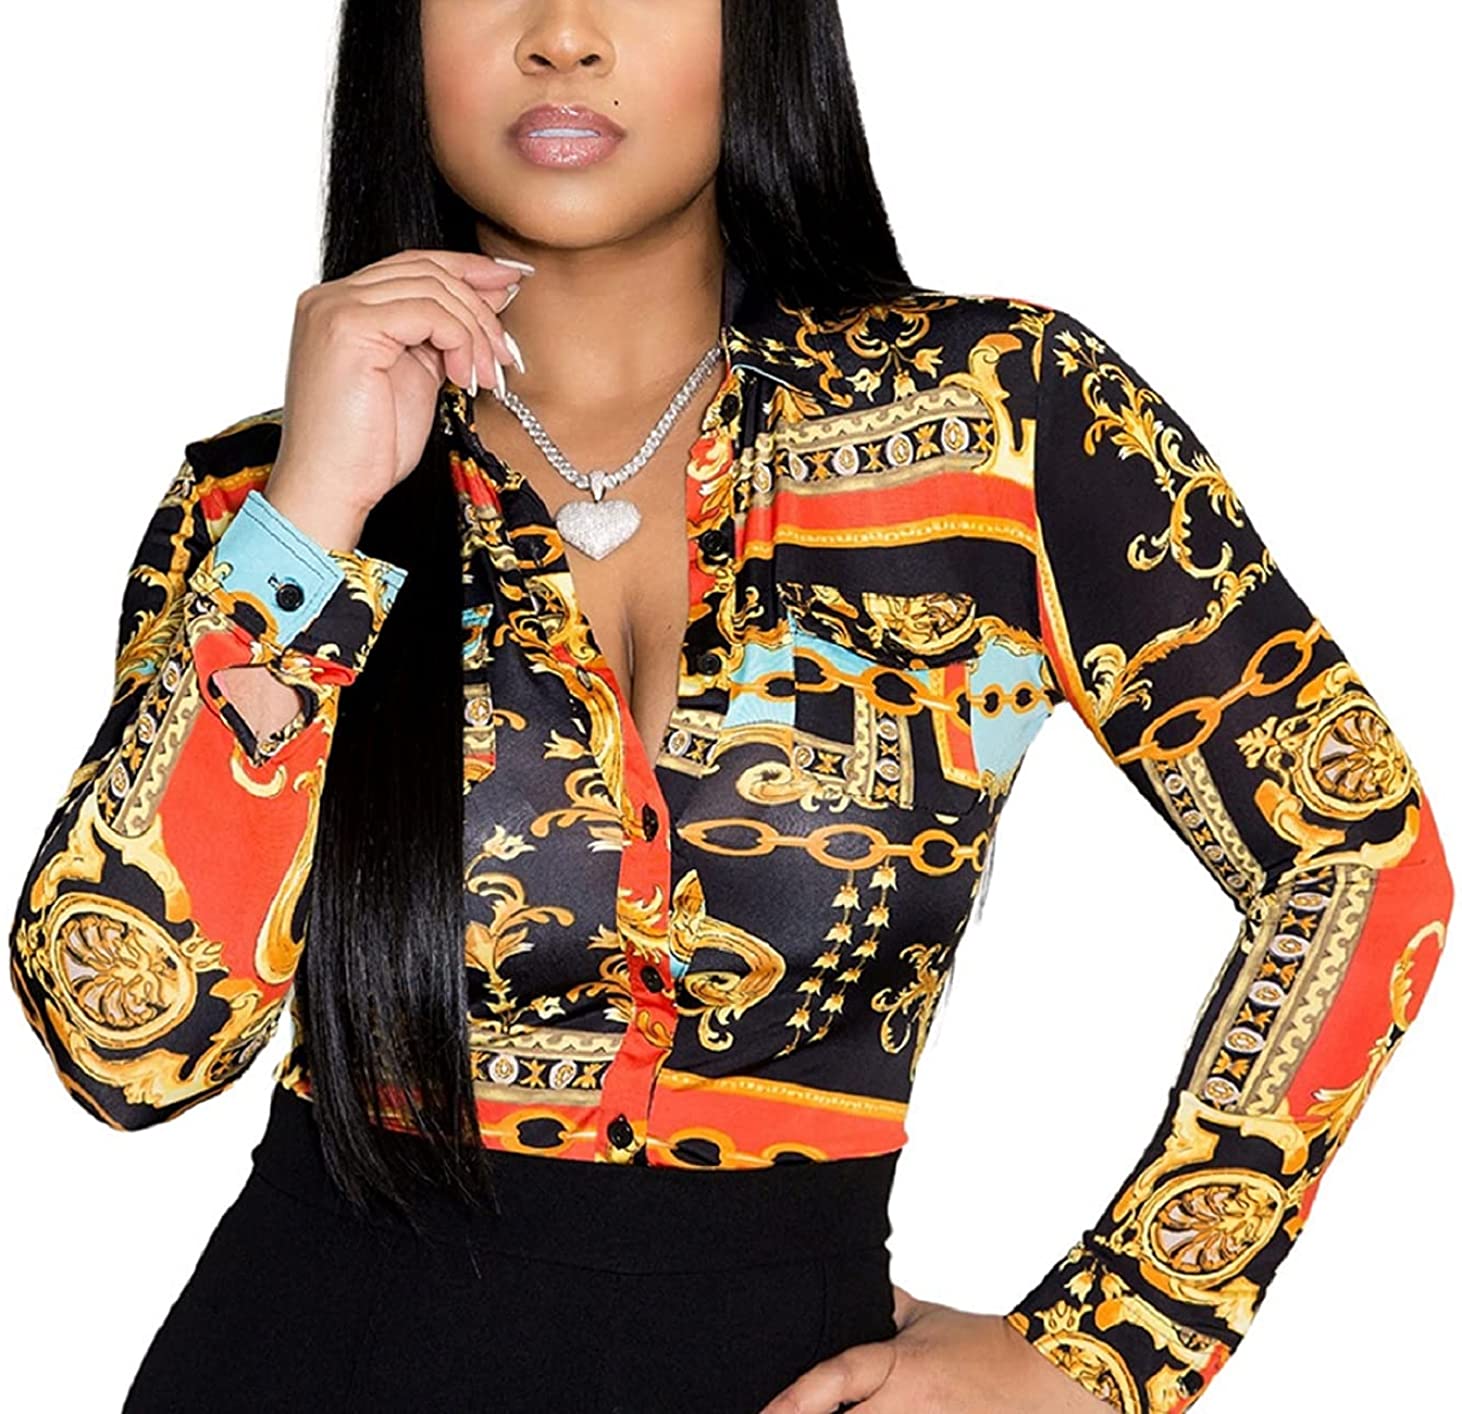  Afro DNA Women's Blouse Casual Long Sleeve Shirt Printed  Button Down Shirts Work Blouses S : Sports & Outdoors